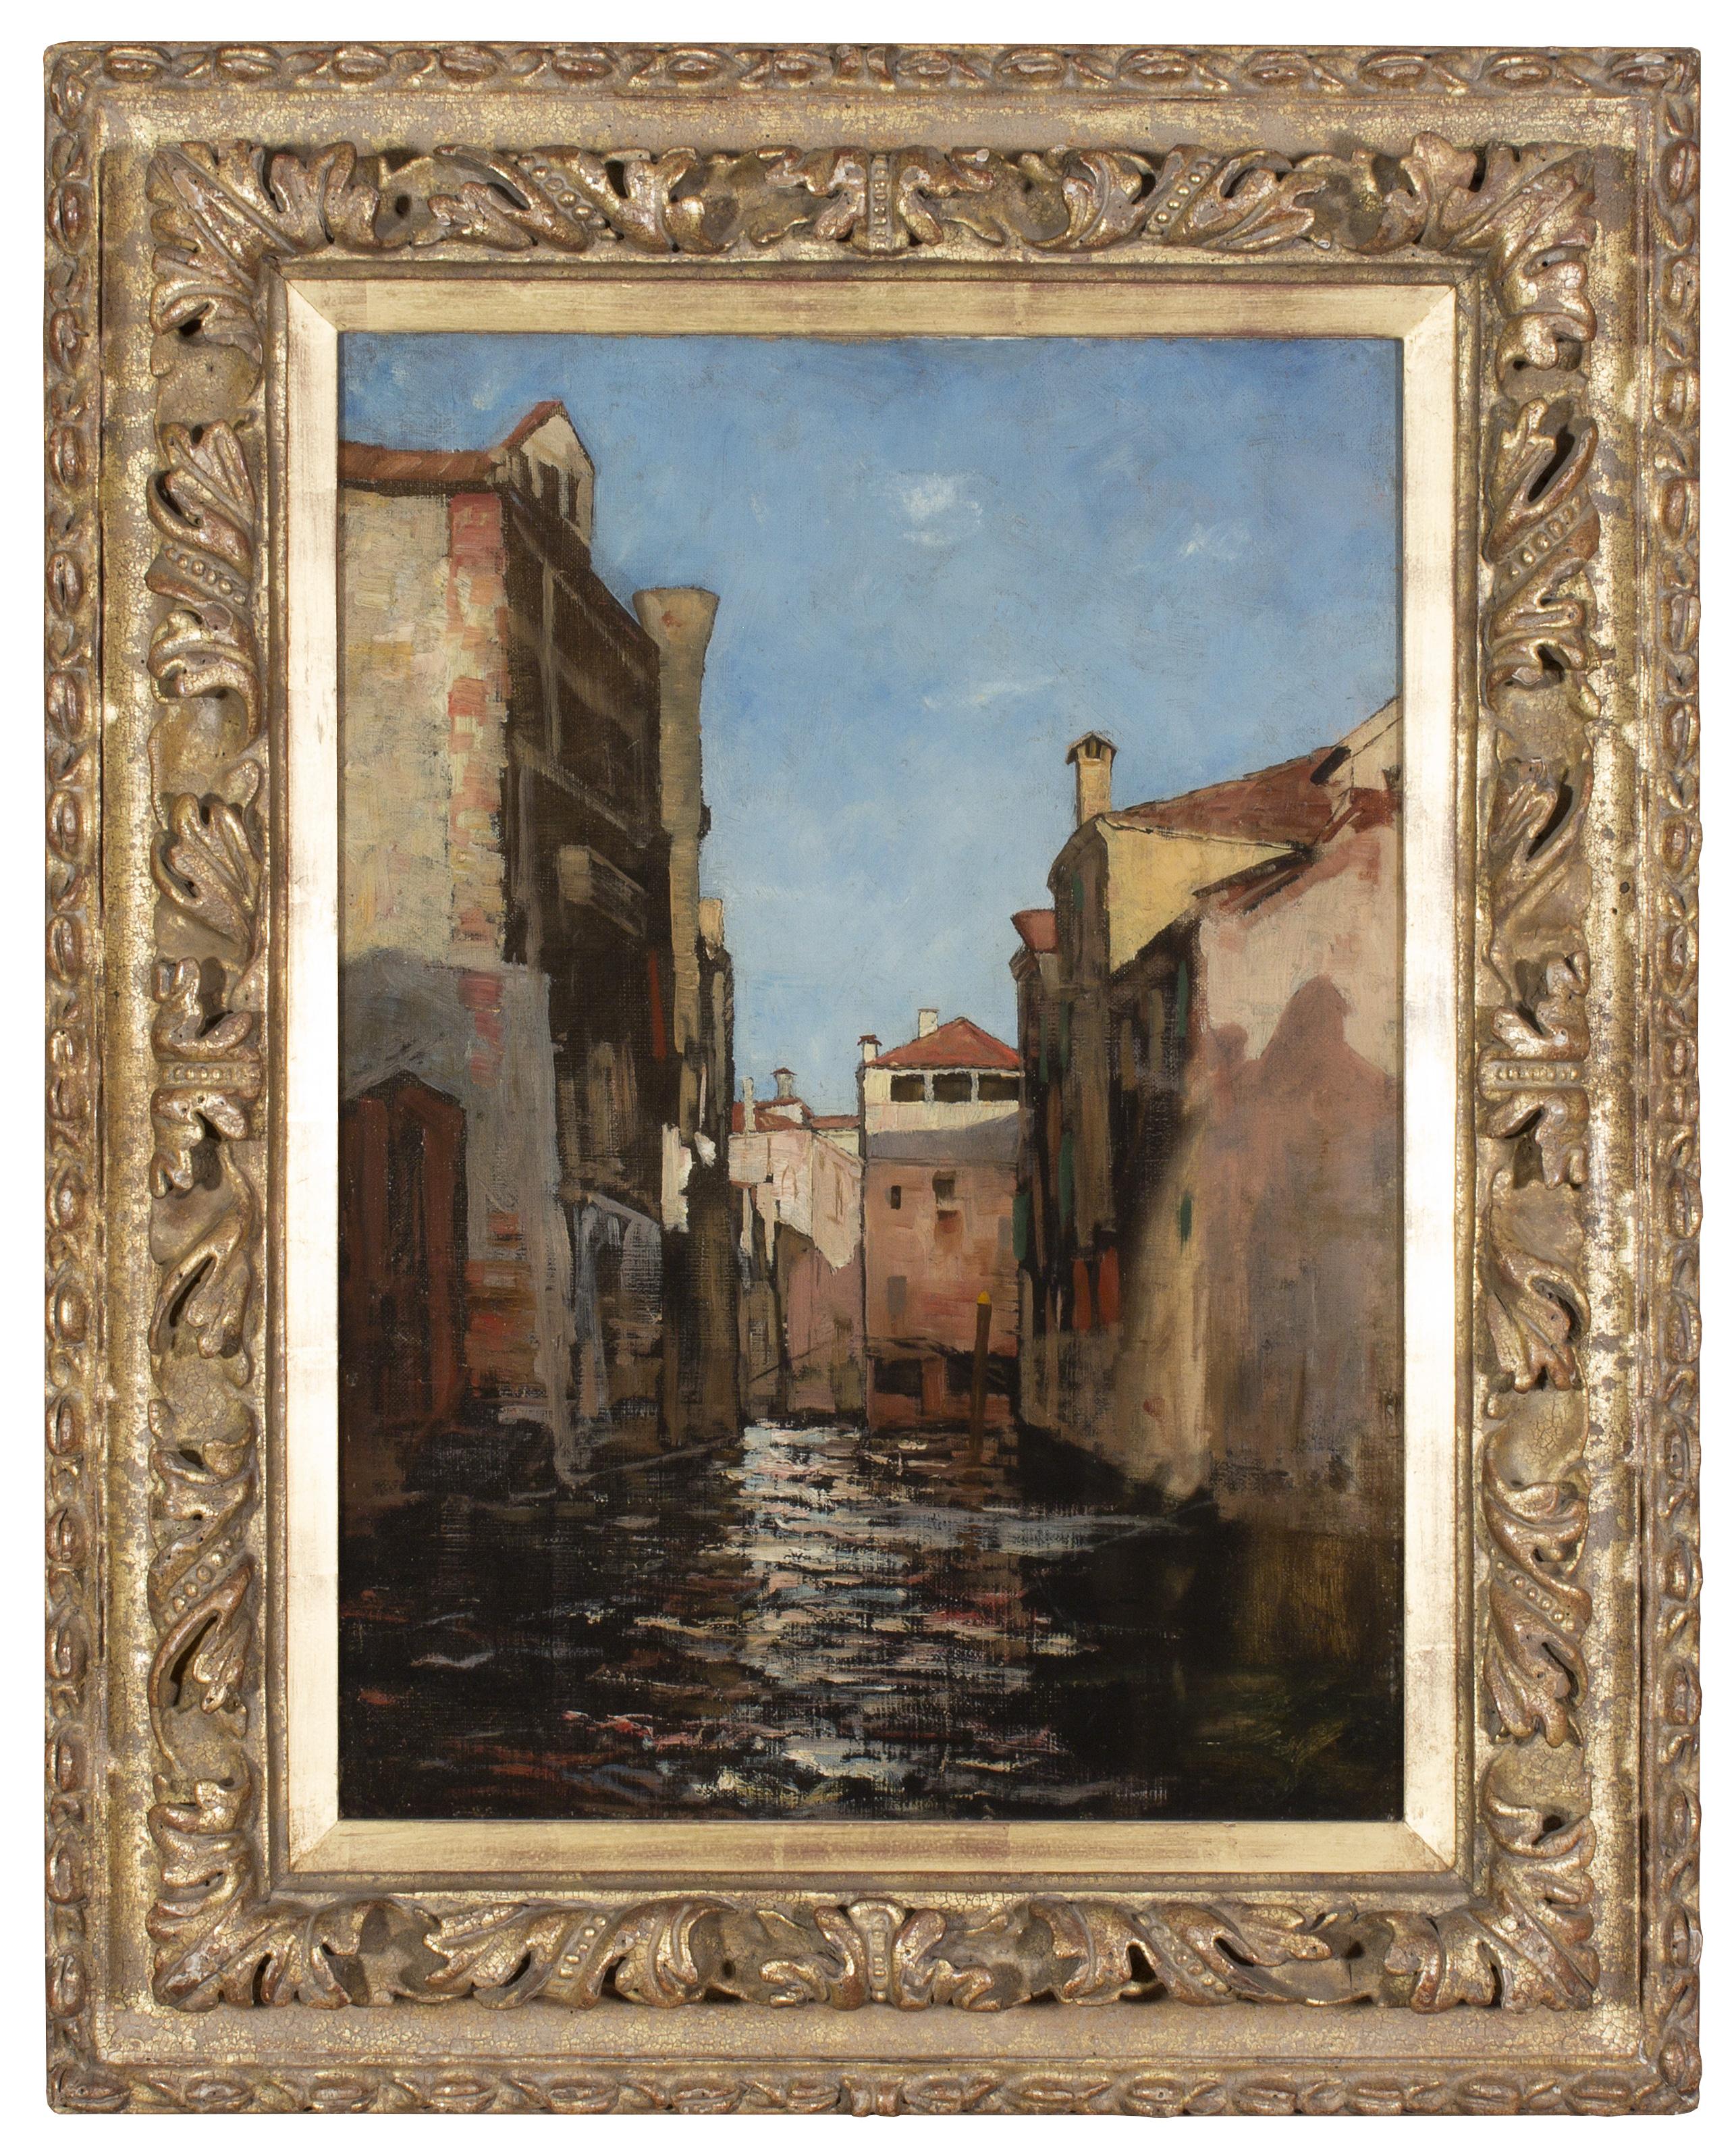 Benjamin Ferris Gilman Landscape Painting - A Canal in Venice - Victorian Lansdscape